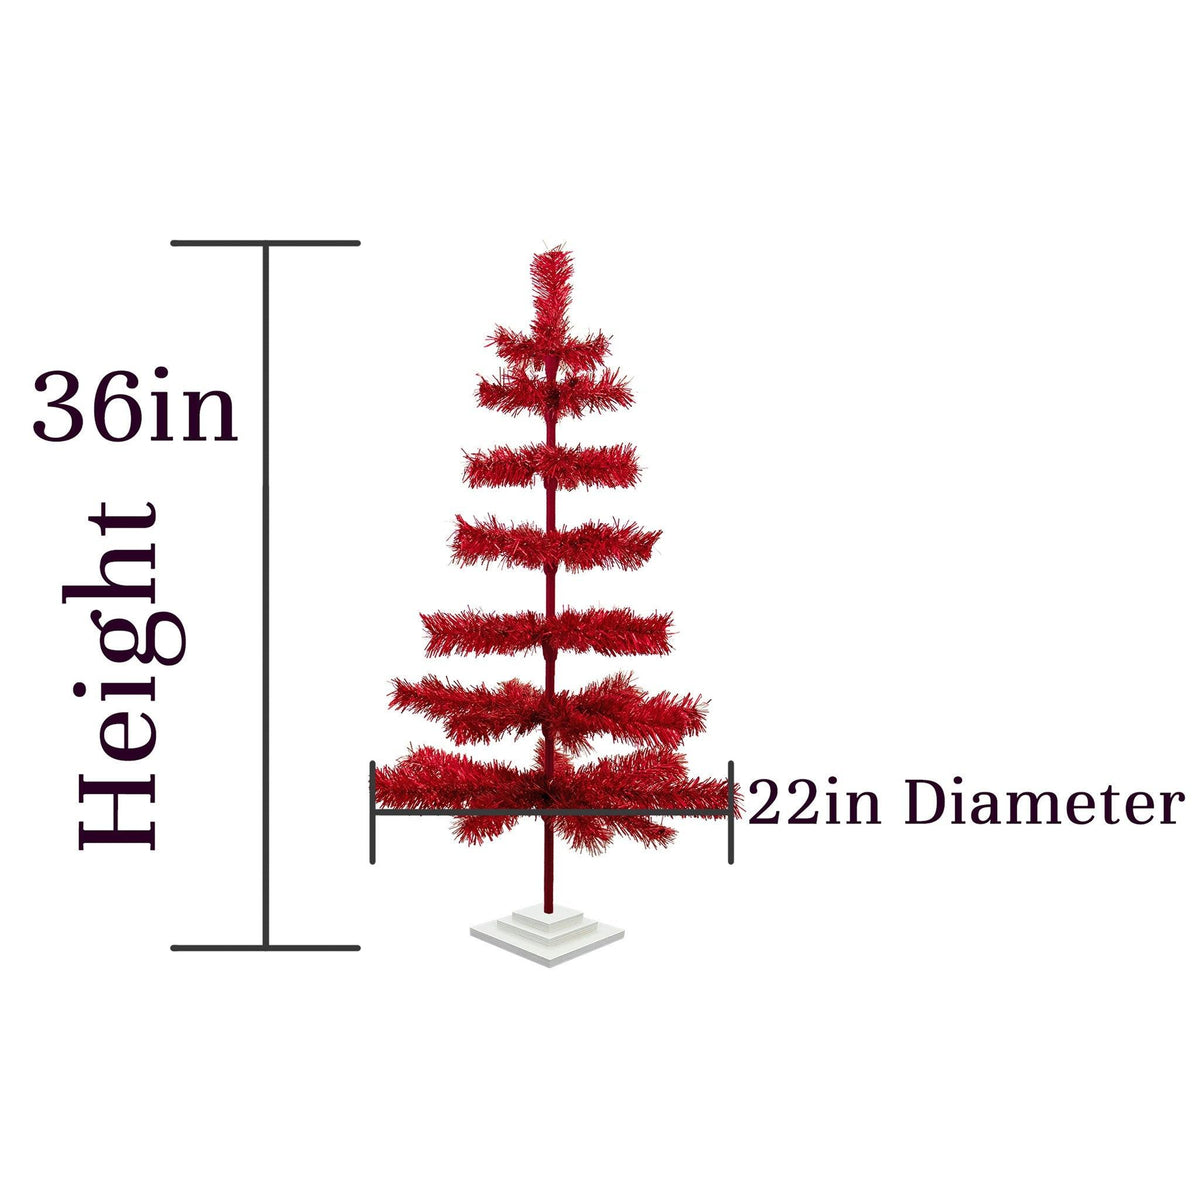 The dimensions of the 3FT tall Red Tinsel Tree sold by Lee Display